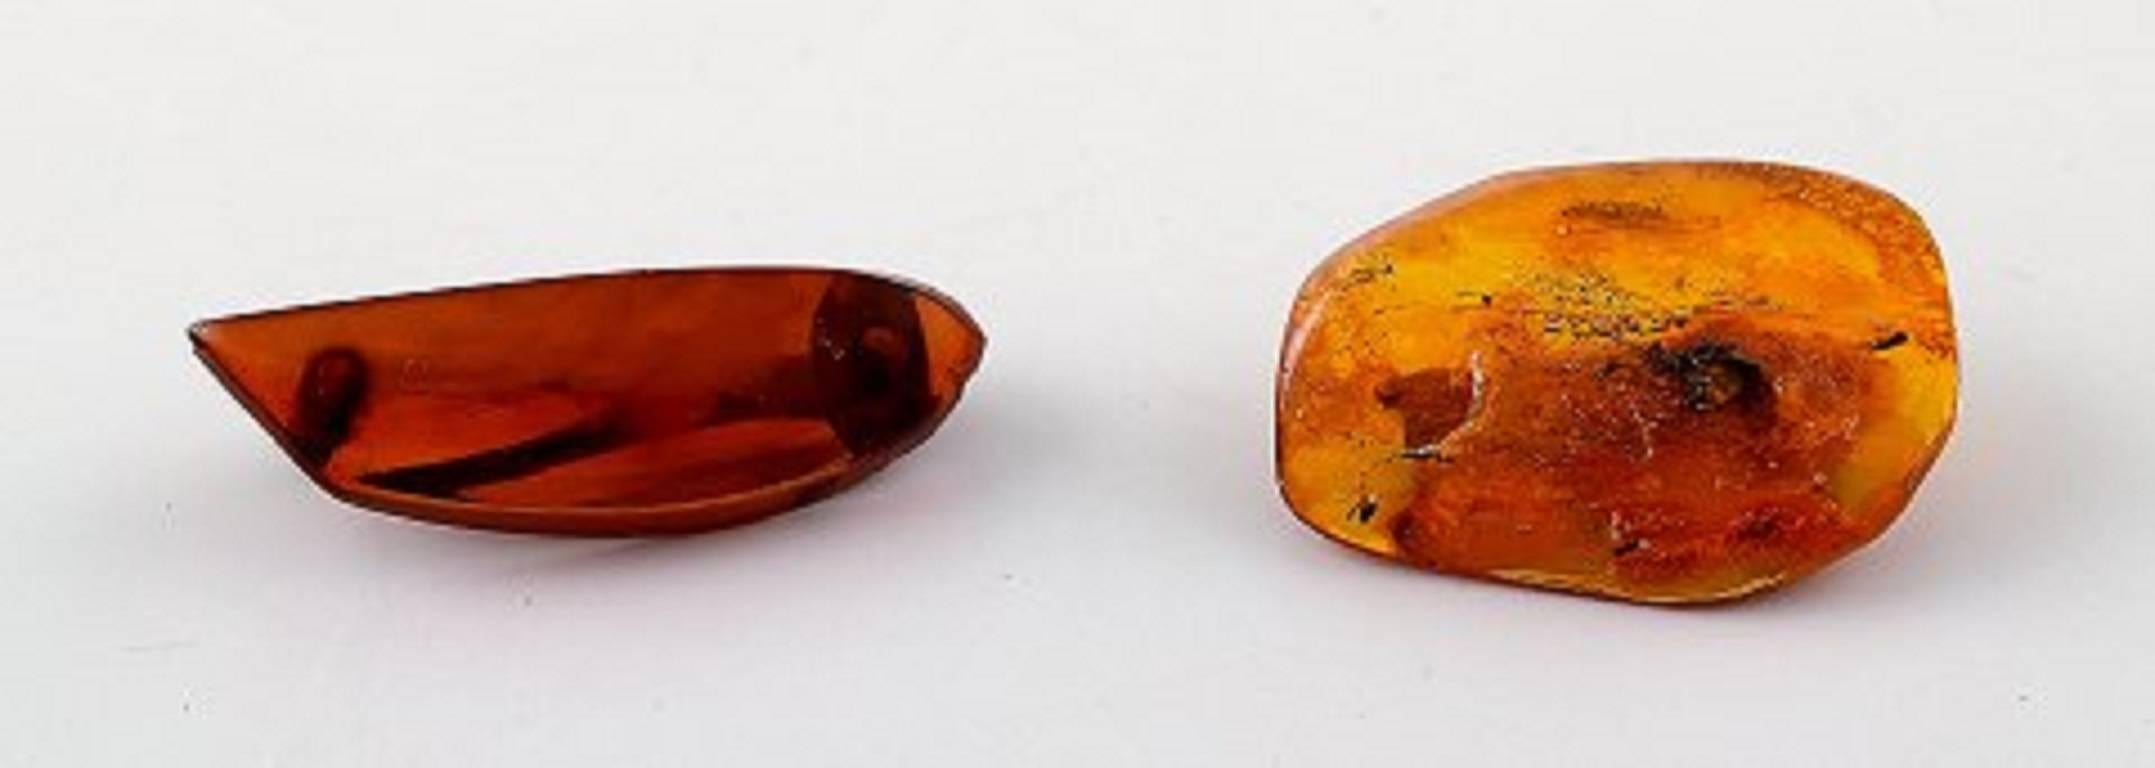 6 amber brooches in different sizes, milk amber and darker amber.
Largest measures: 5 x 3 cm.
A total of 26 grams.
In good condition.